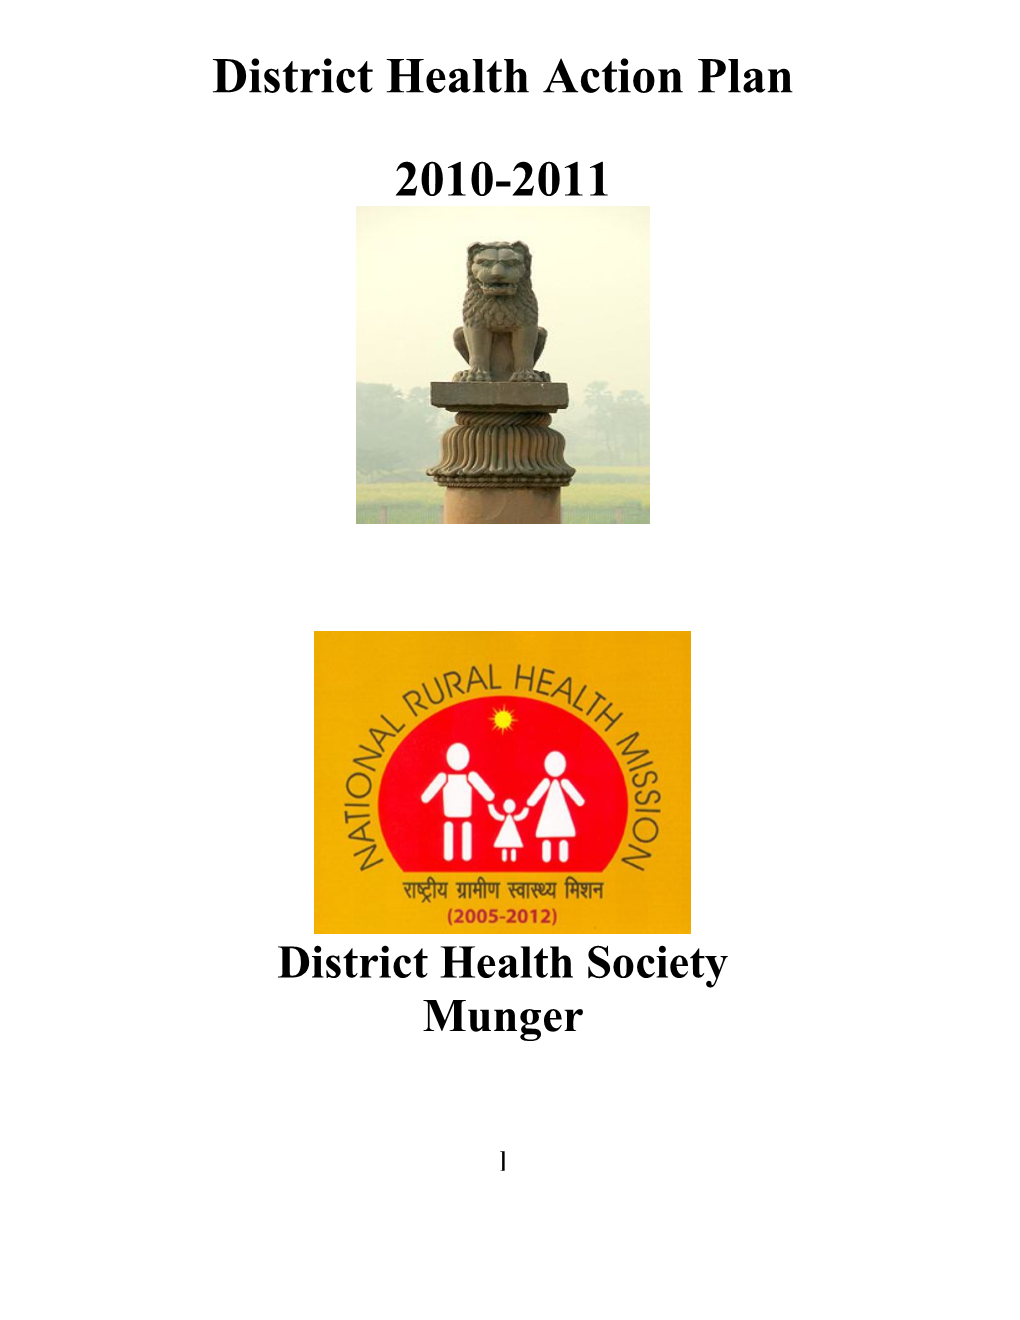 District Health Action Plan 2010-2011